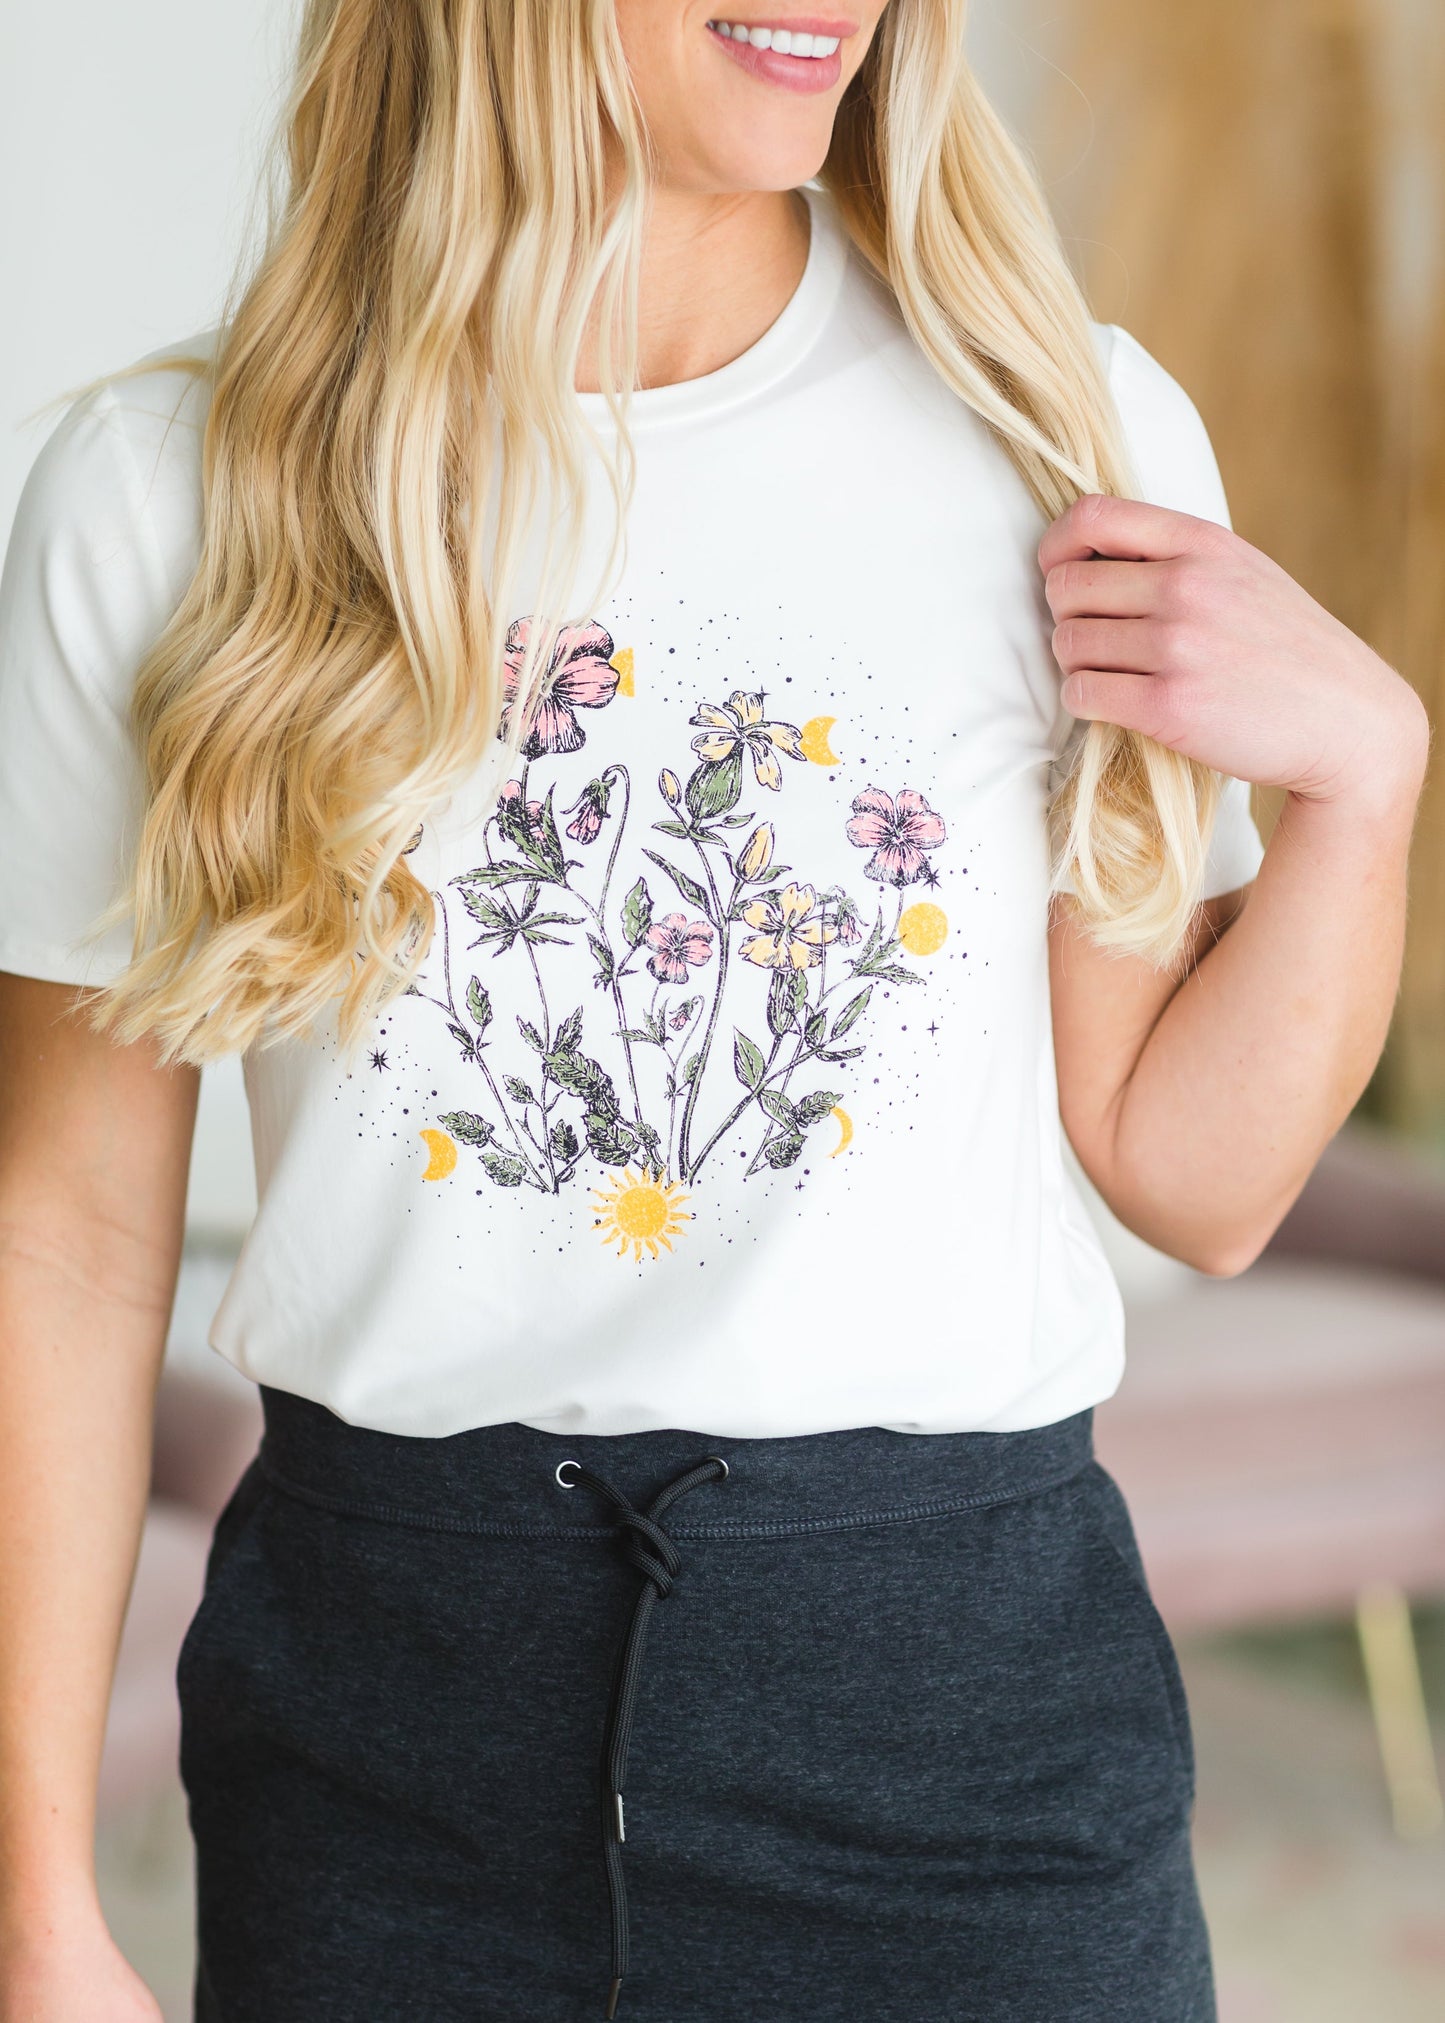 Sun + Moon Floral Graphic Tee - FINAL SALE Tops